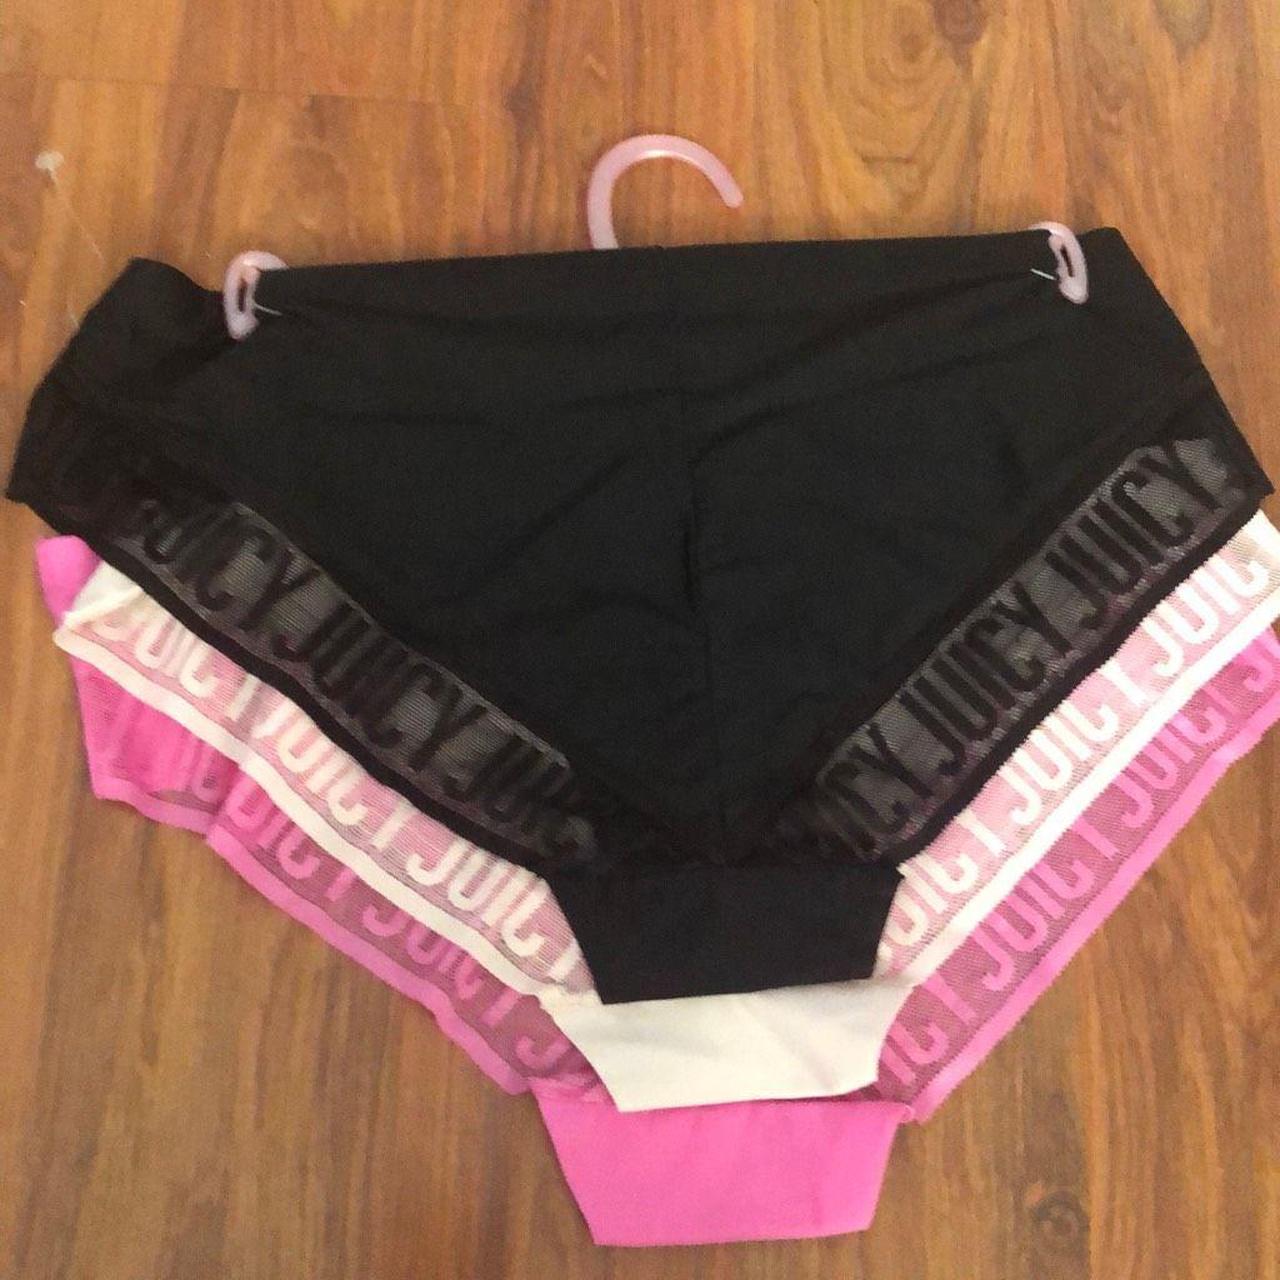 New with tags. Juicy Couture Intimate Lace Cheeky - Depop